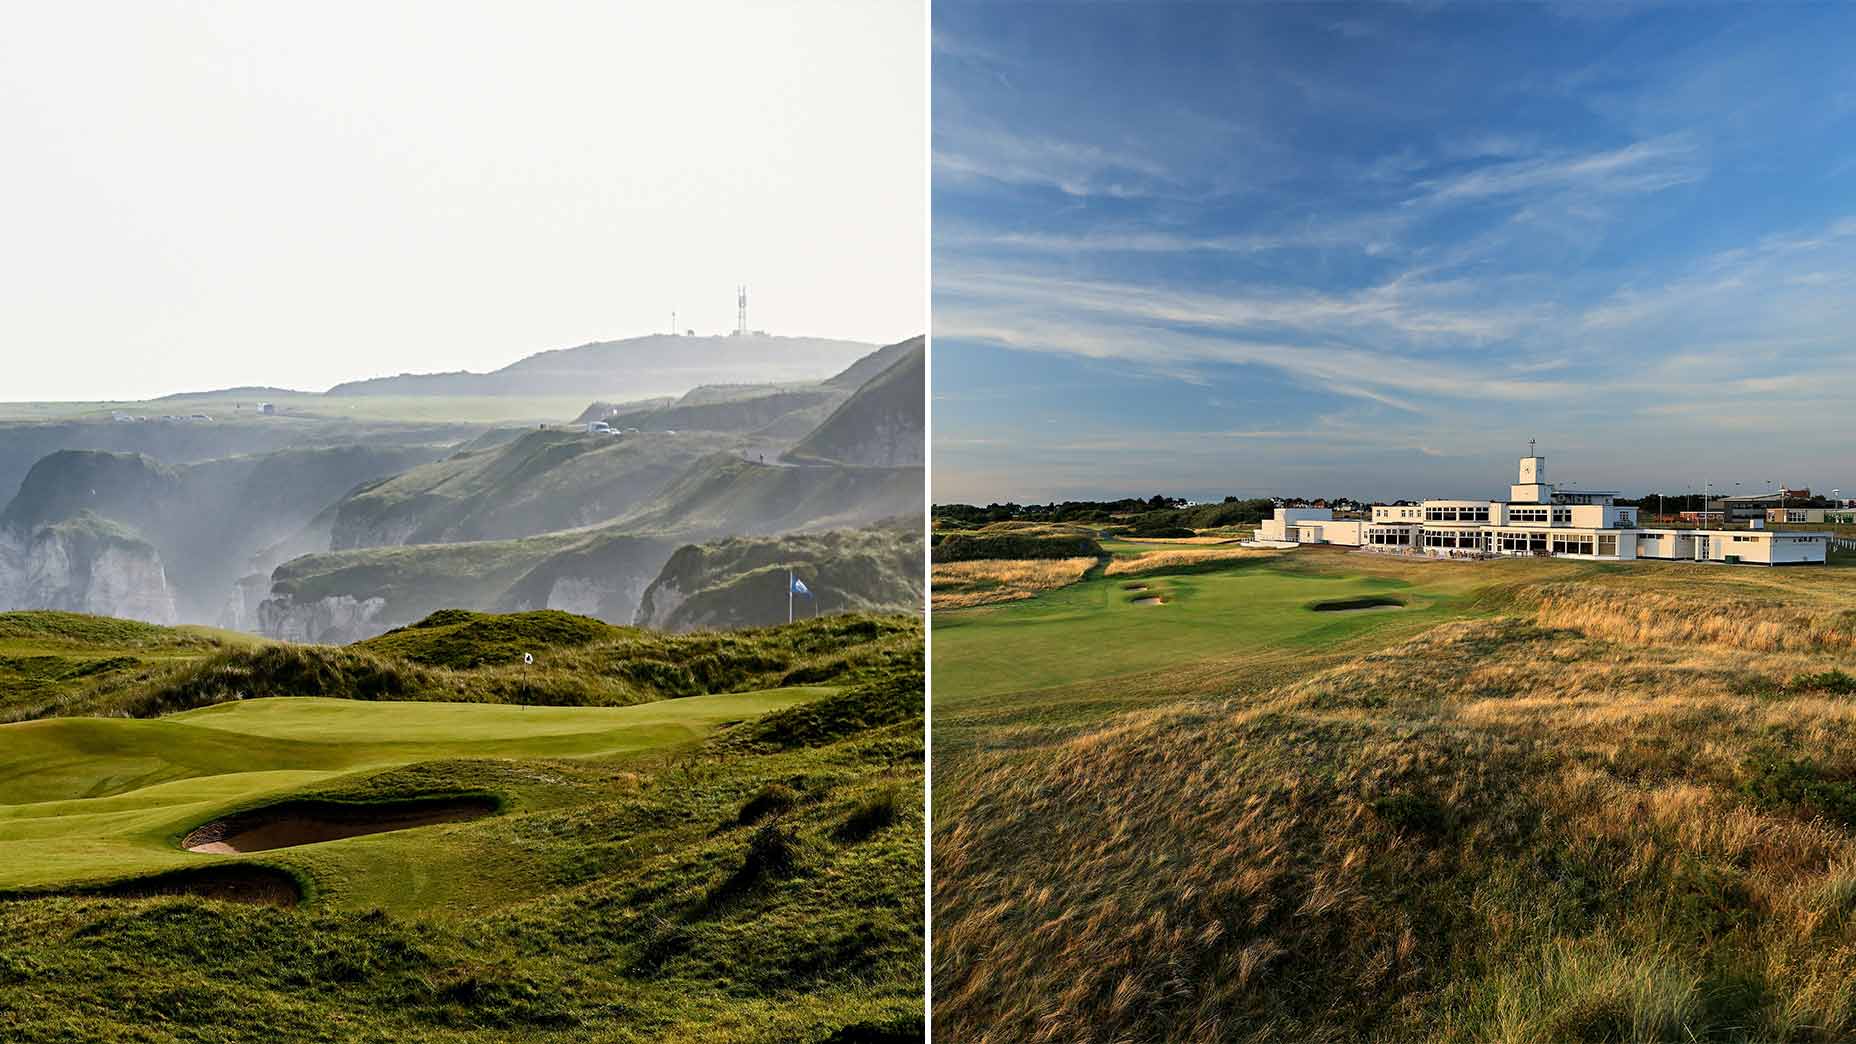 A side-by-side image of Royal Portrush and Royal Birkdale.